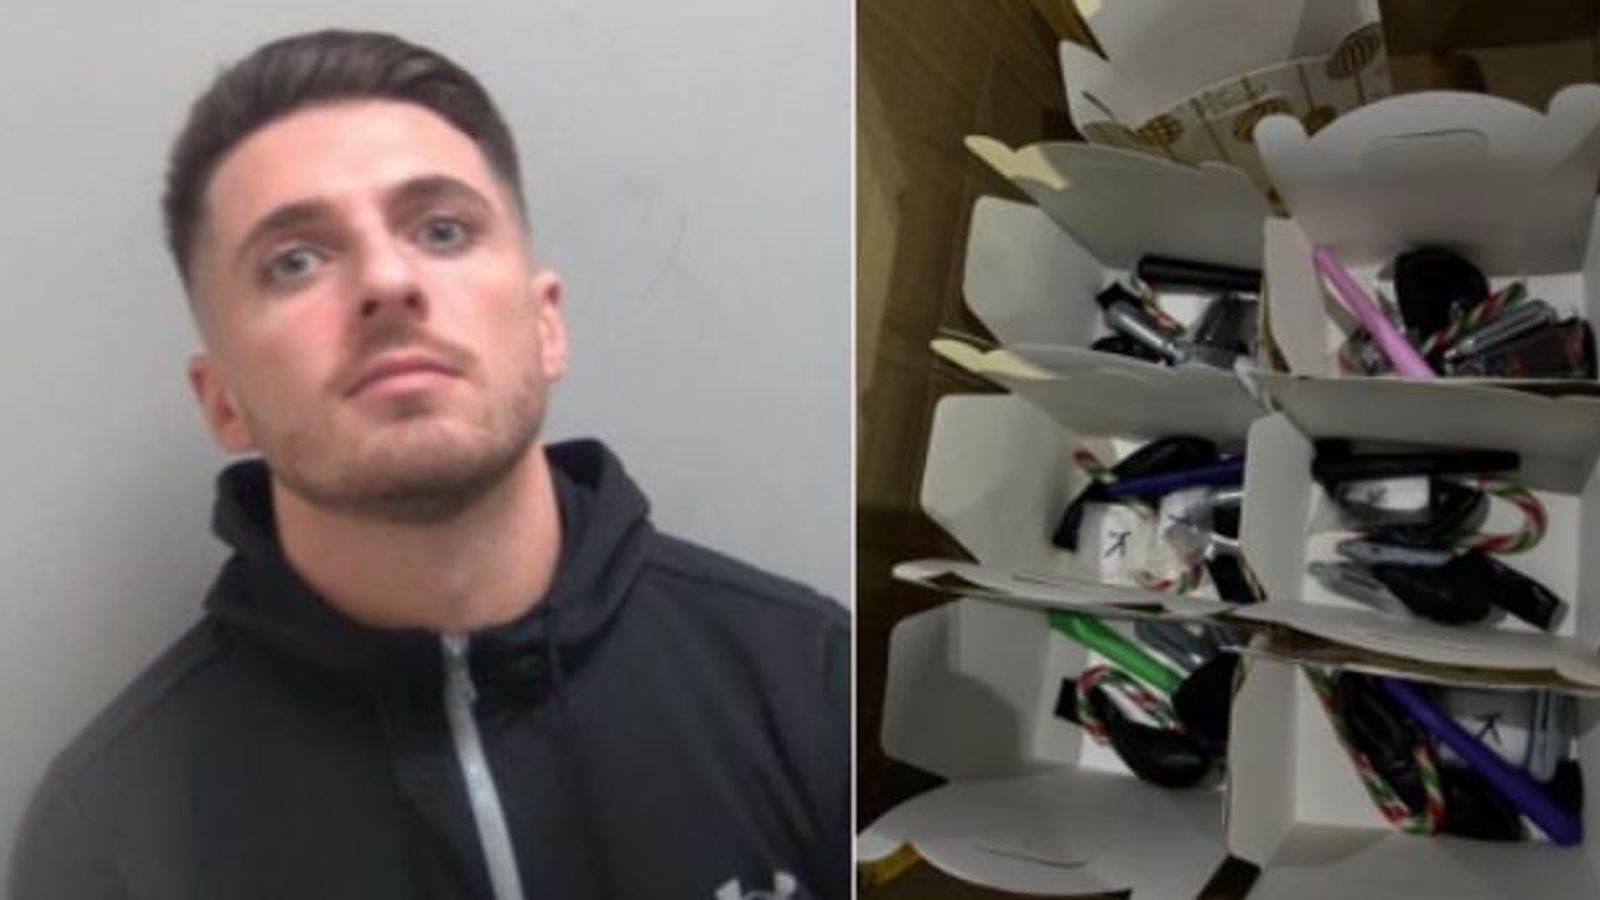 Christmas 'party planner' drug dealer becomes first to be jailed for possession of laughing gas canisters